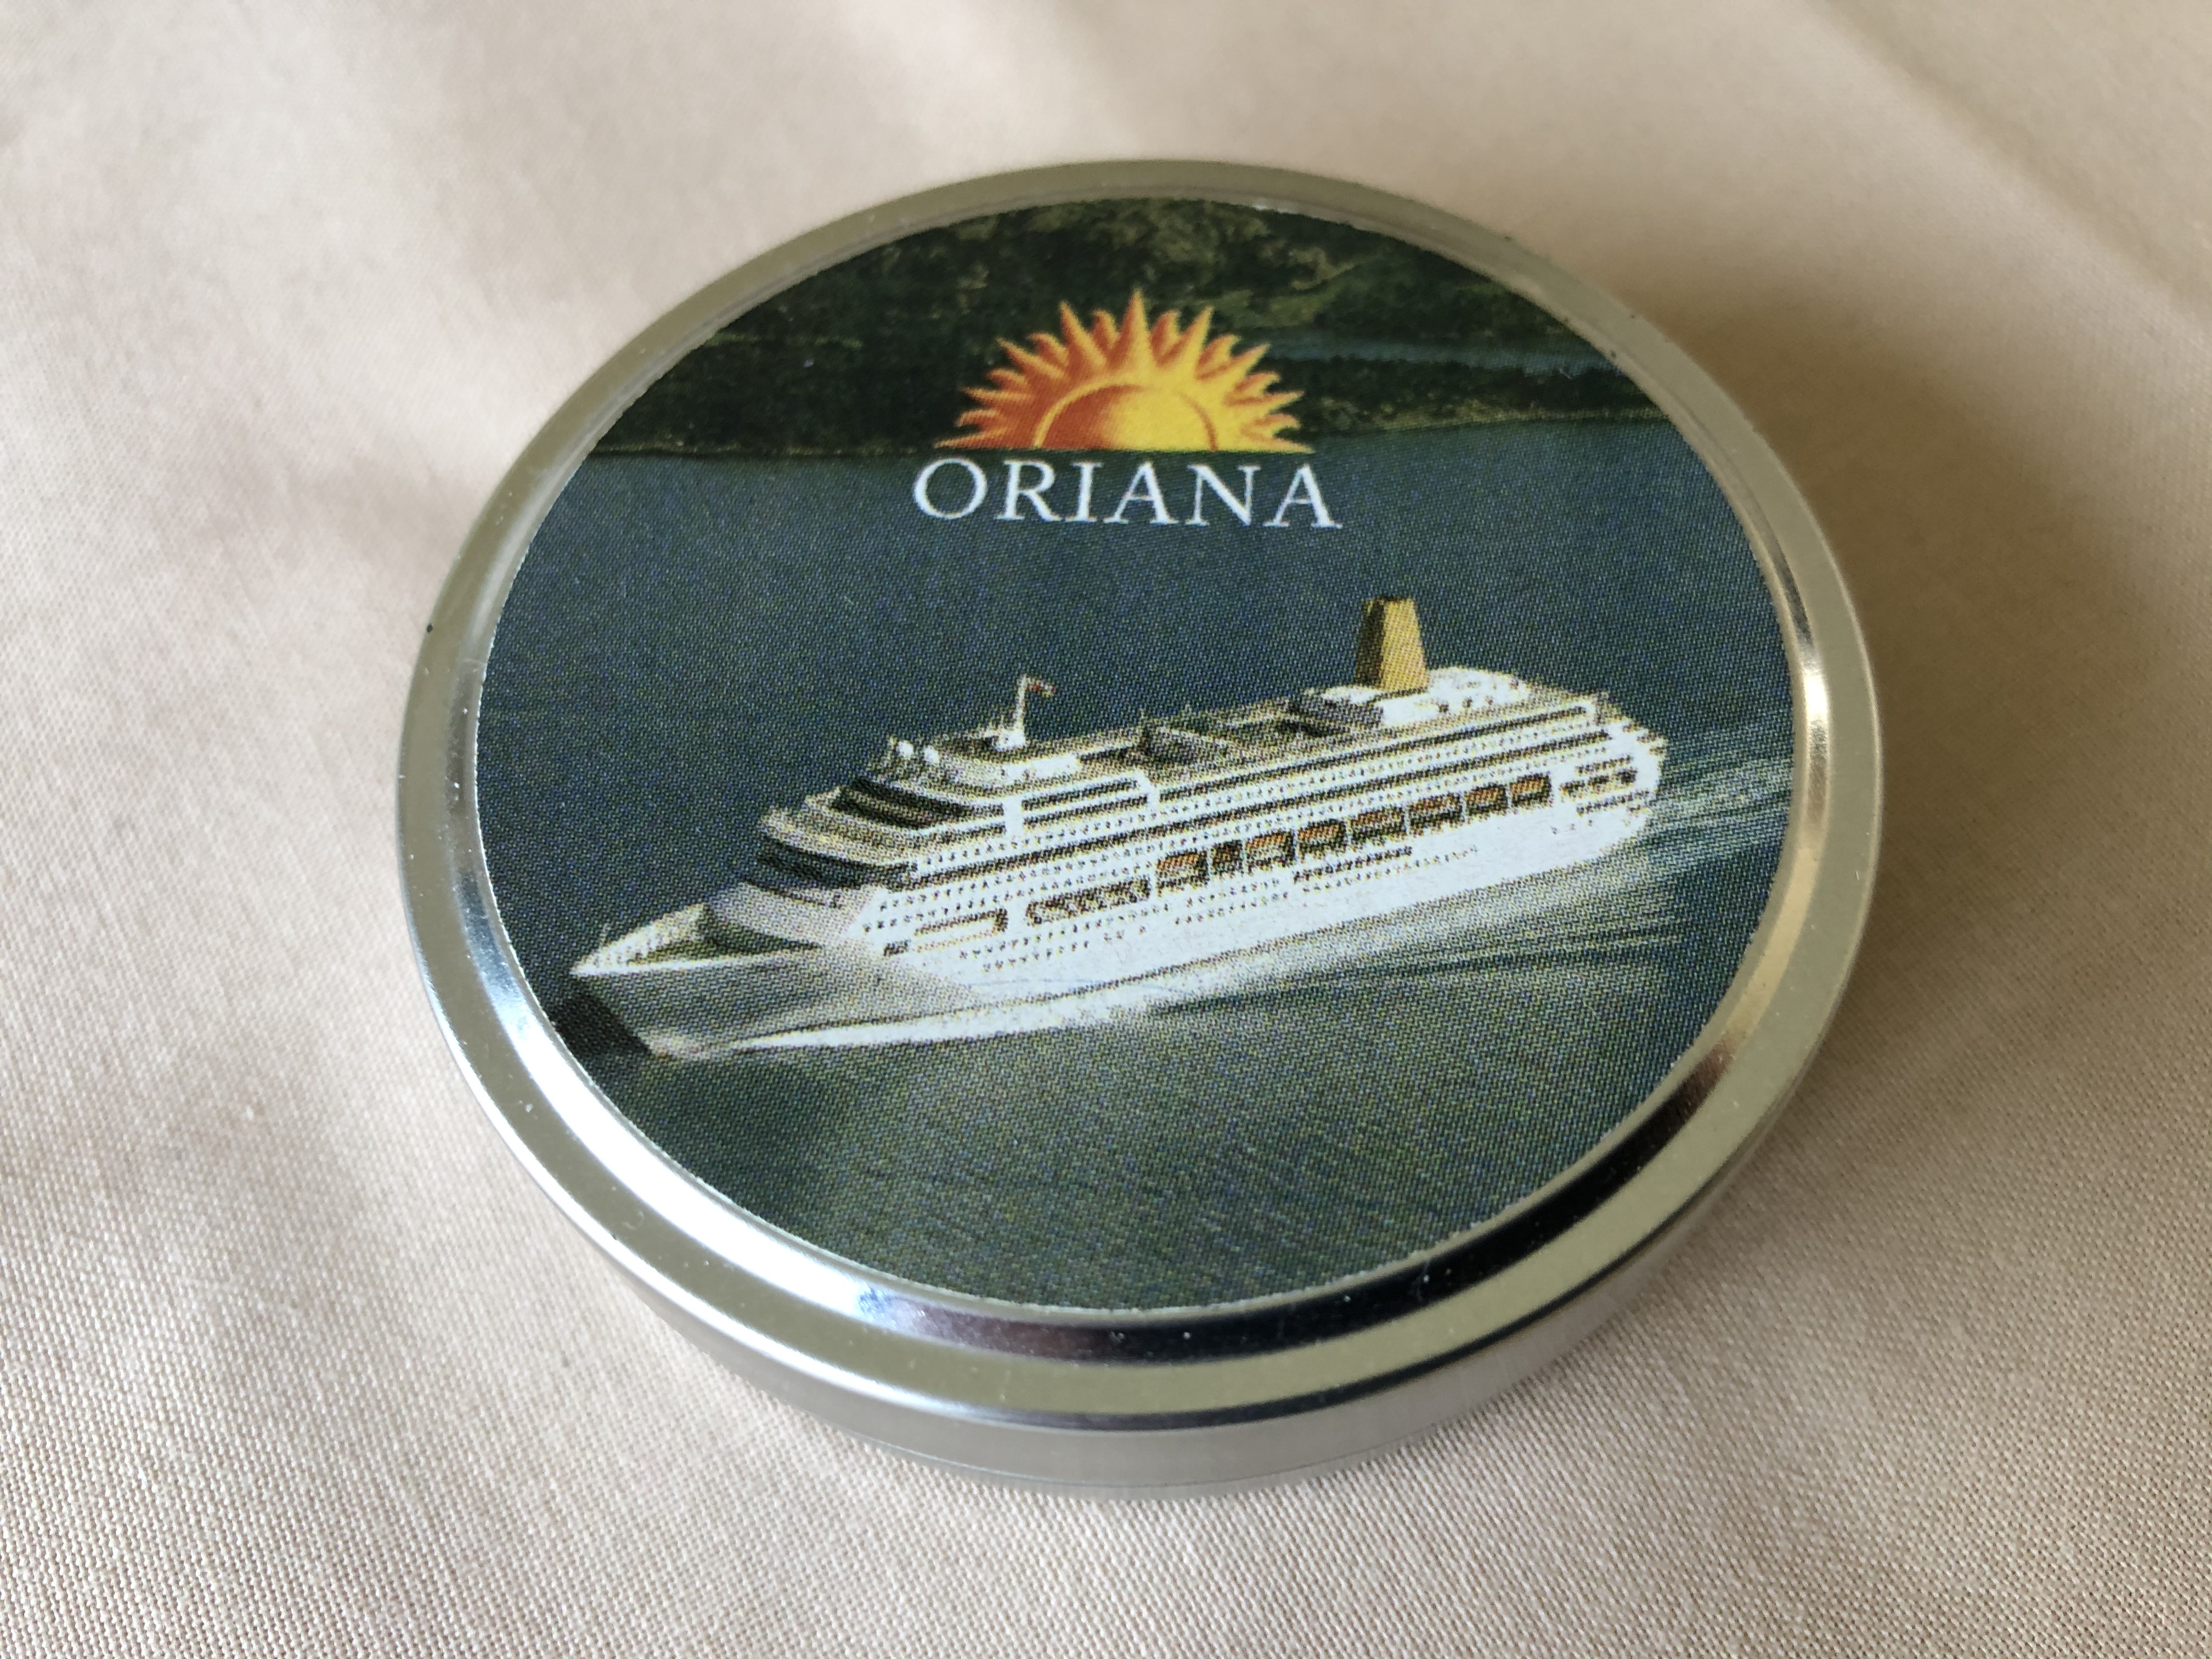 SOUVENIR TIN FROM THE ORIGINAL OLD ORIENT LINE VESSEL THE ORIANA